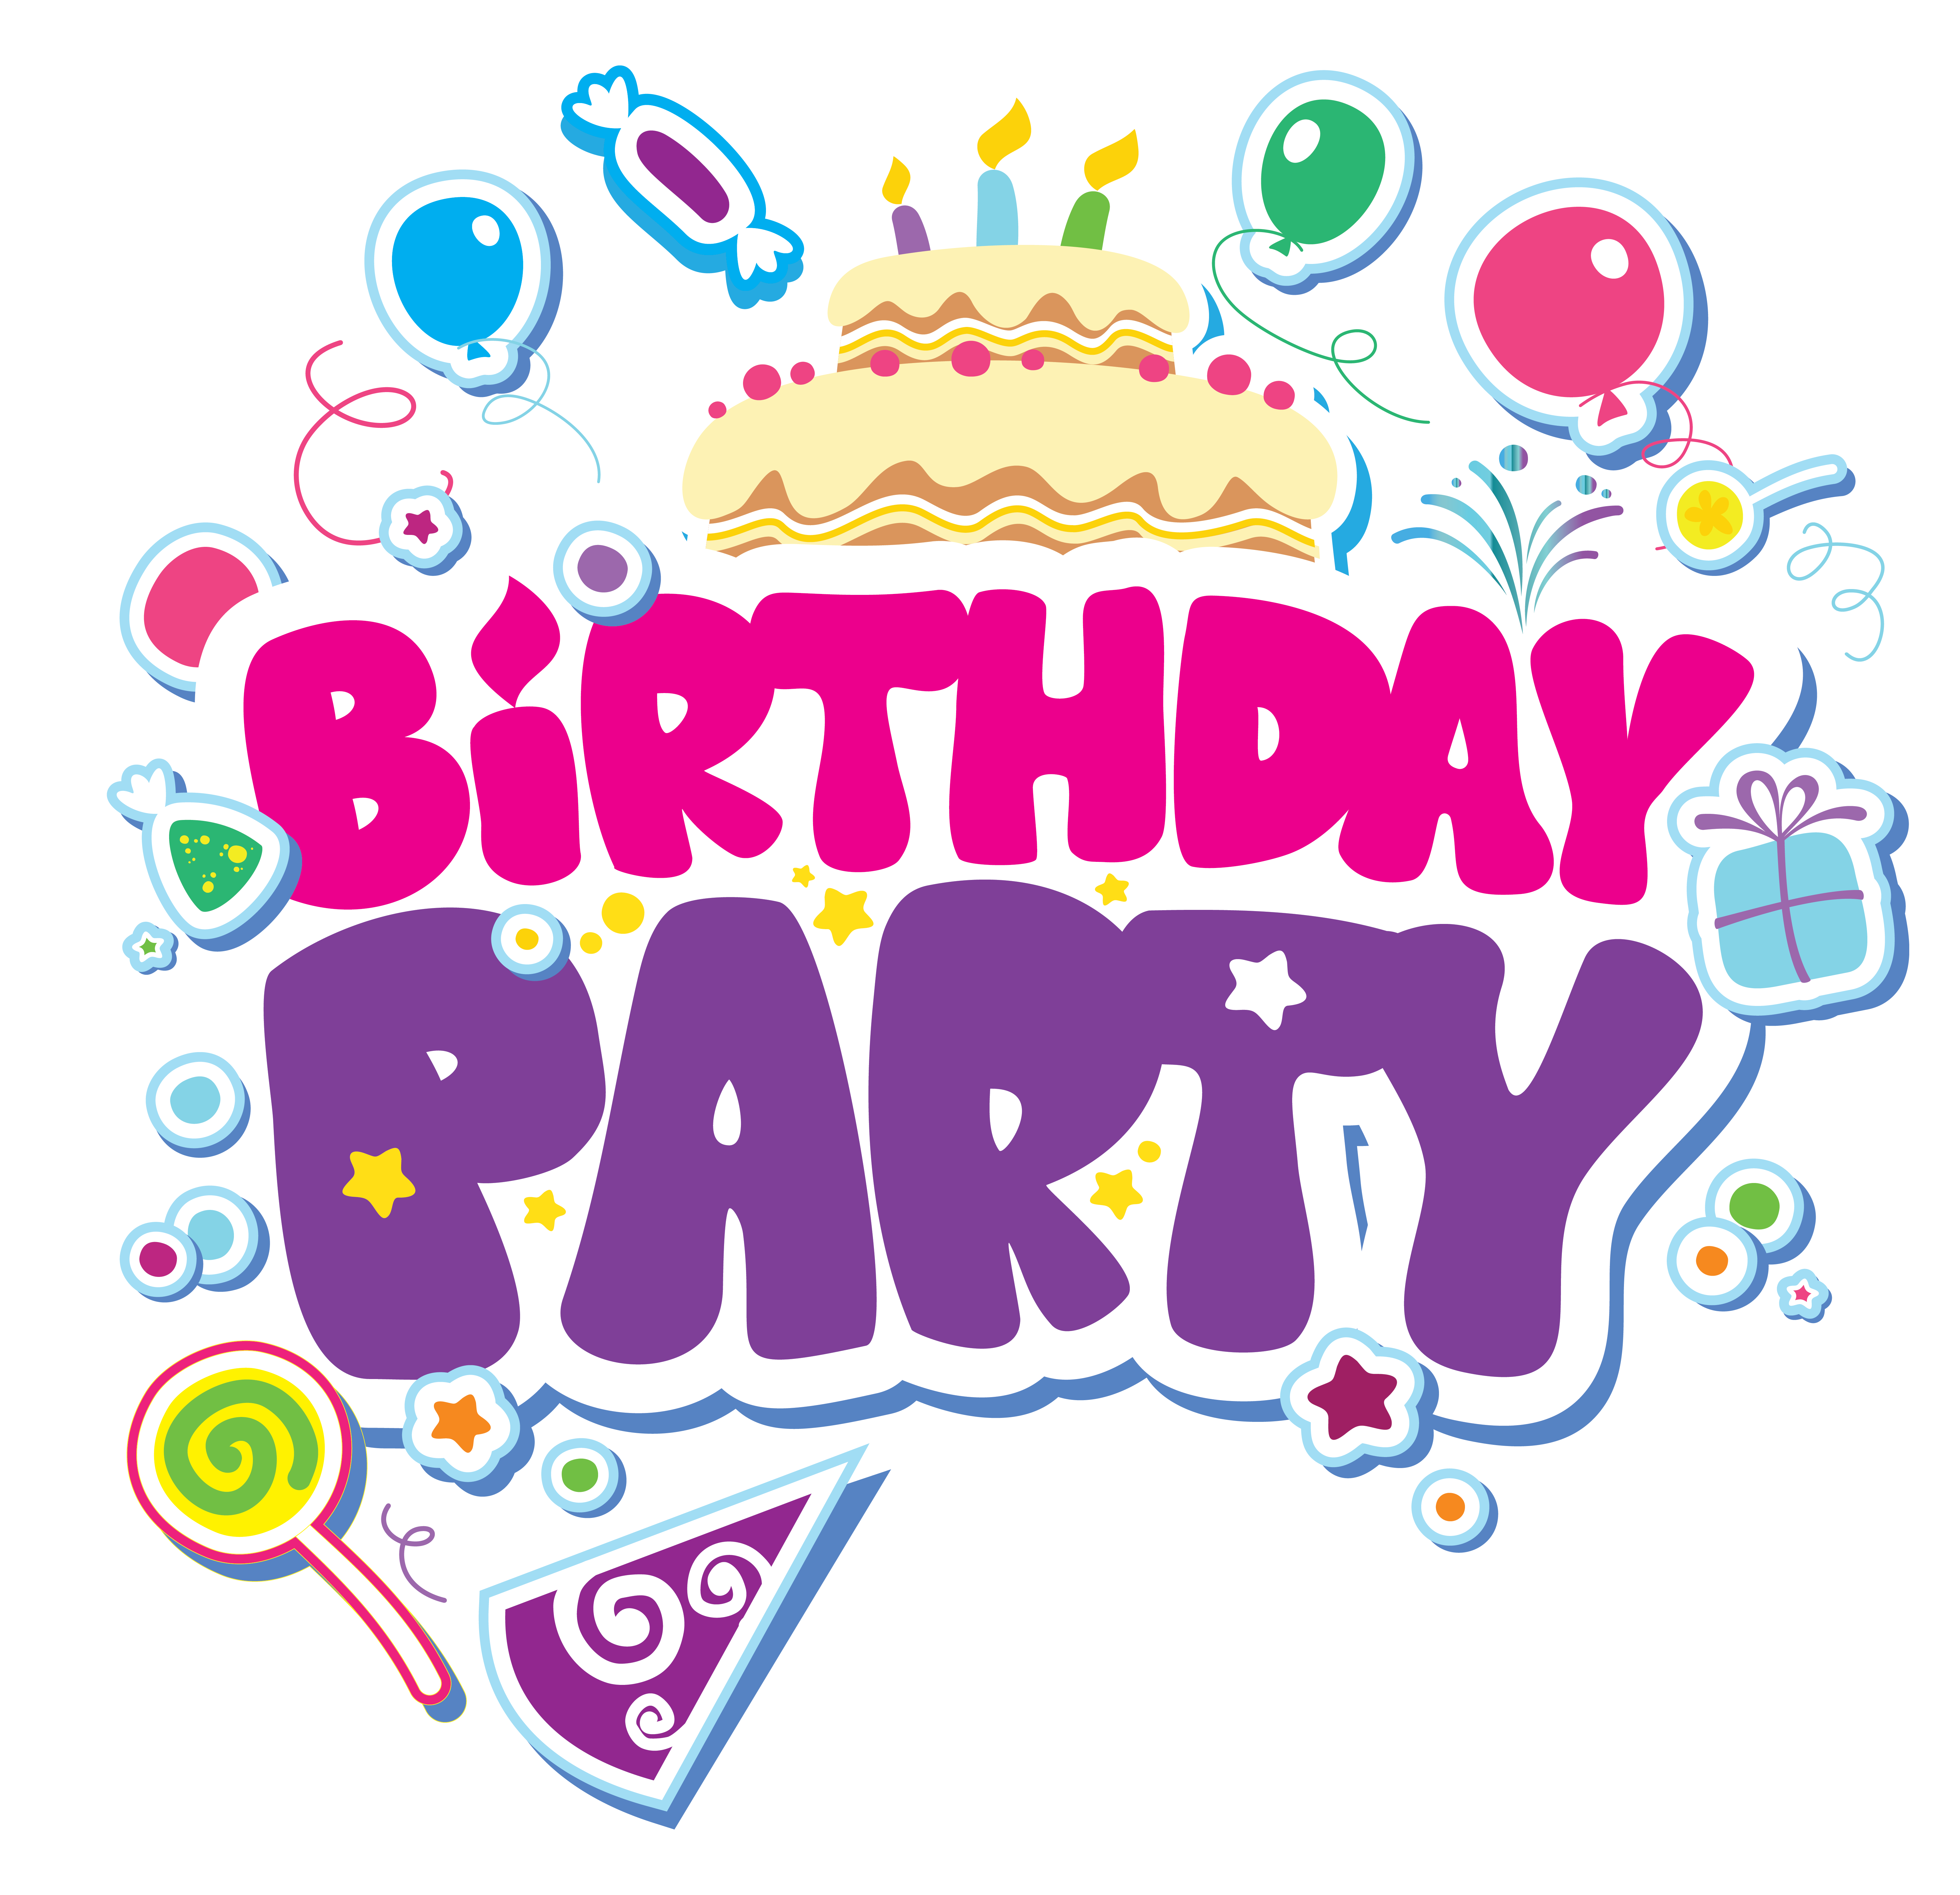 free clipart images birthday party - photo #8